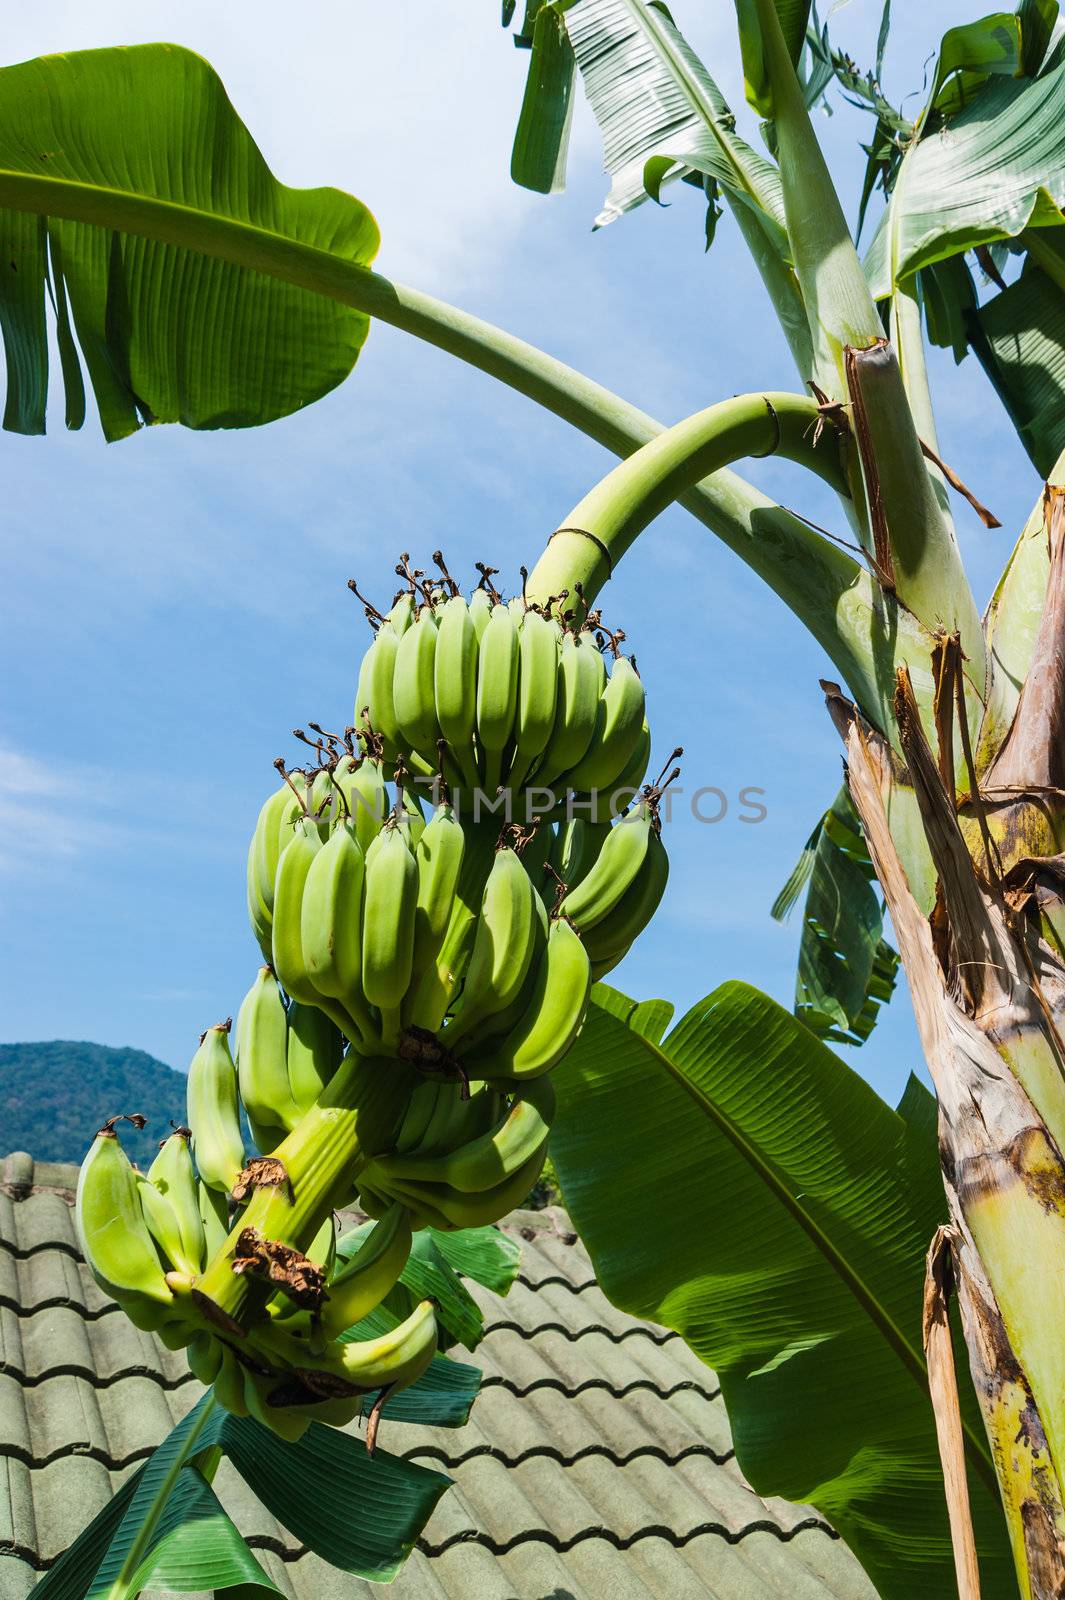 Unripe bananas on a branch in Thailand